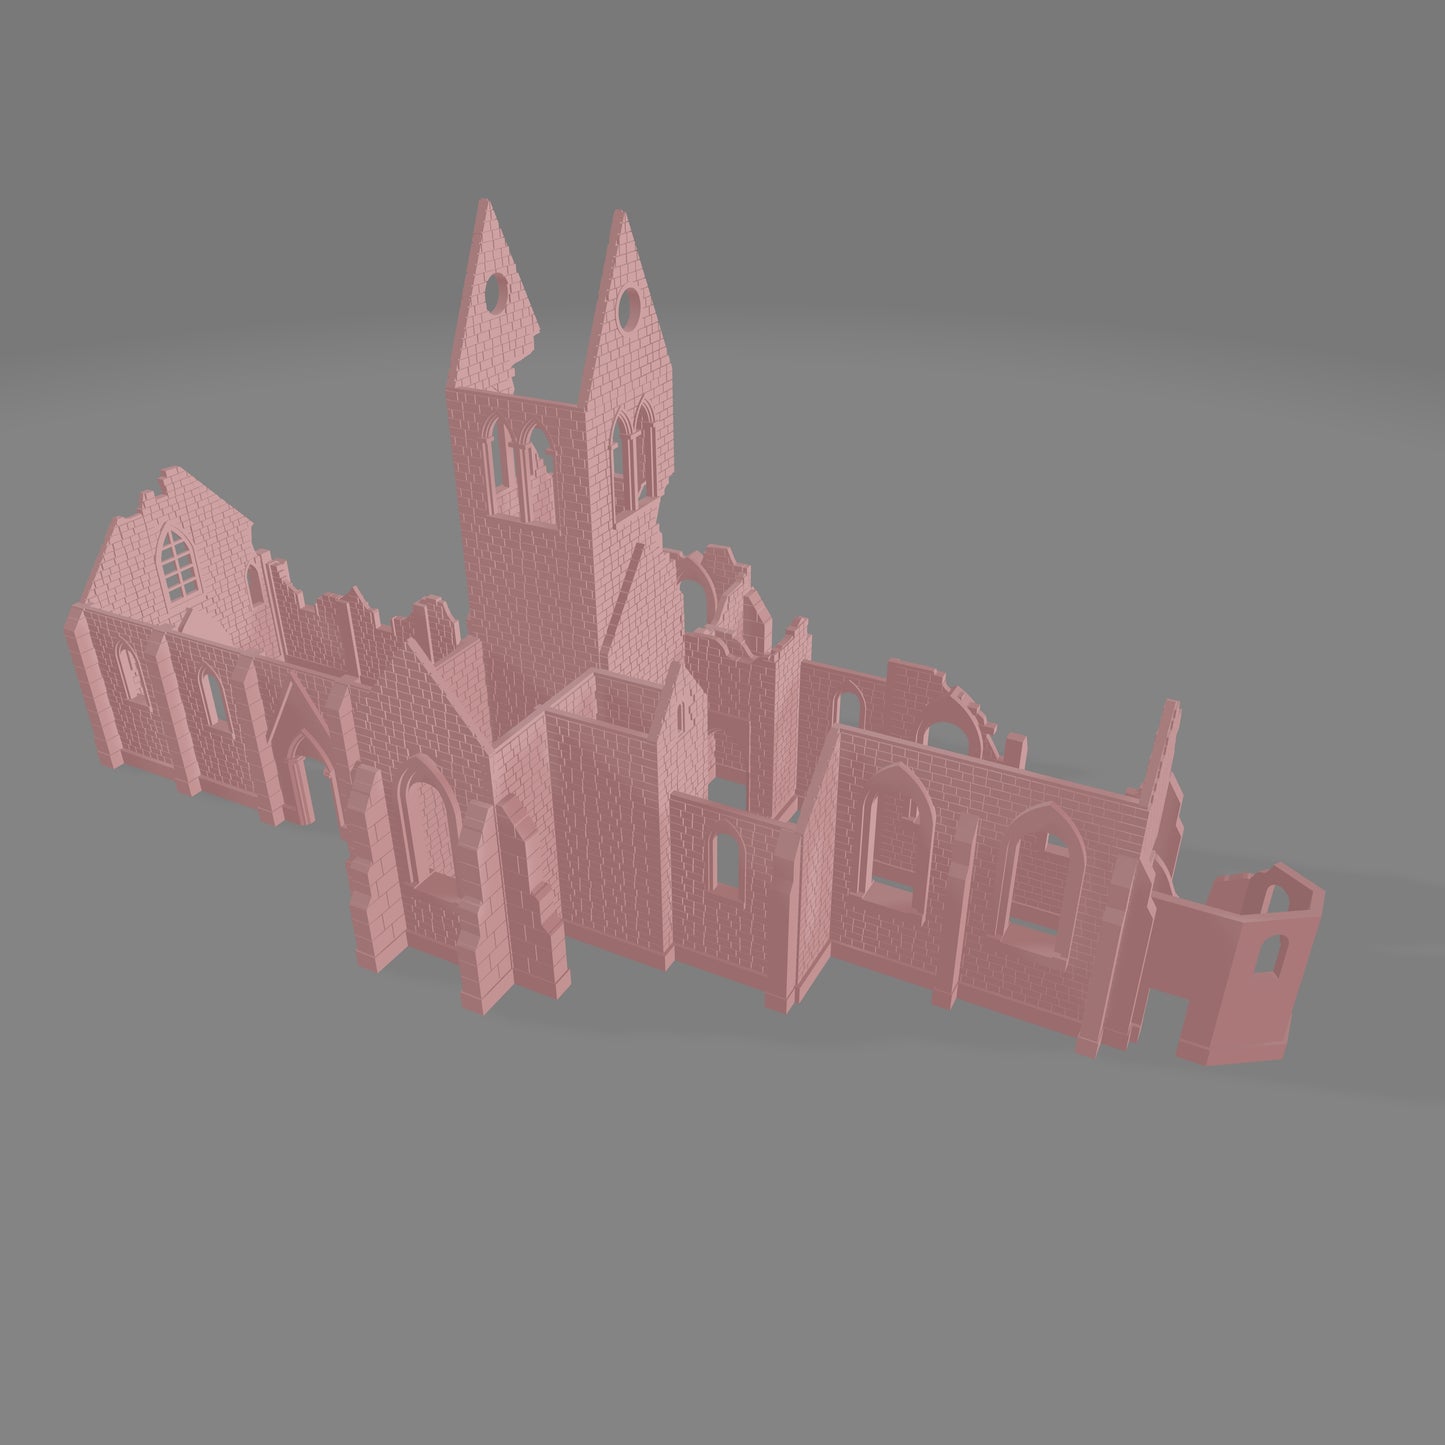 Large European Church - Commissioned